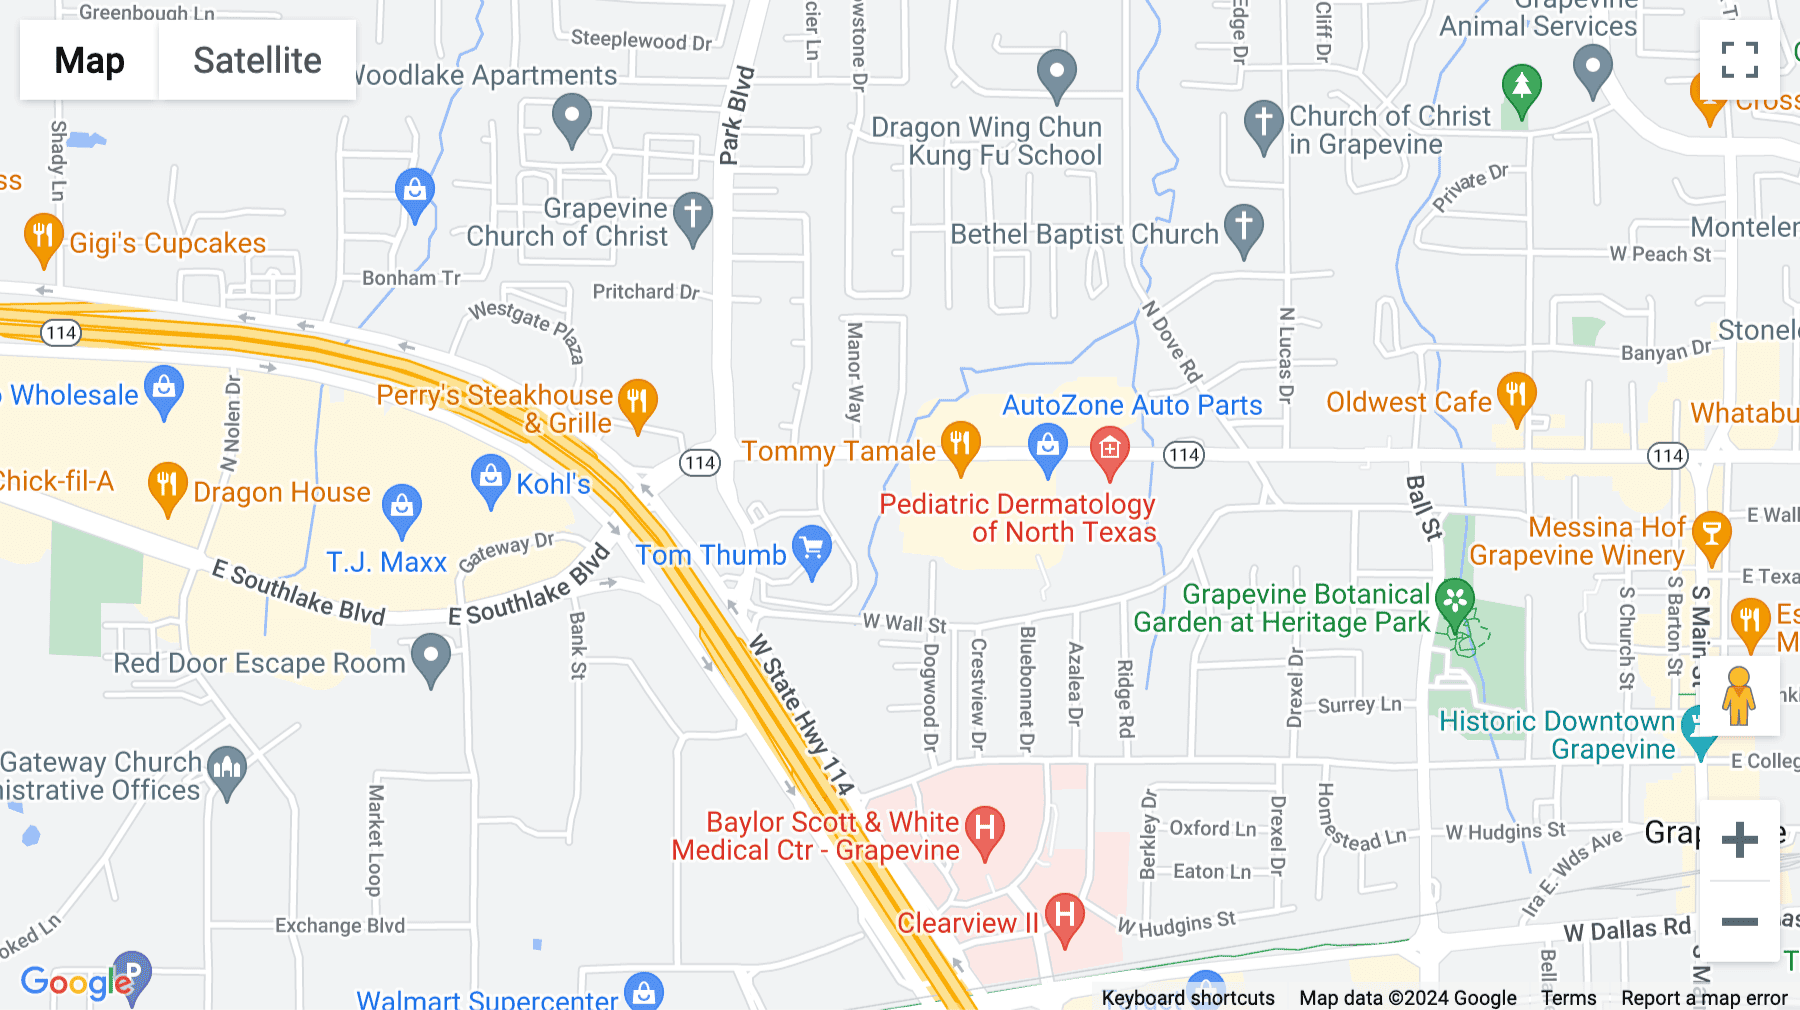 Click for interative map of 1701 West Northwest Highway, Suite 100, Grapevine